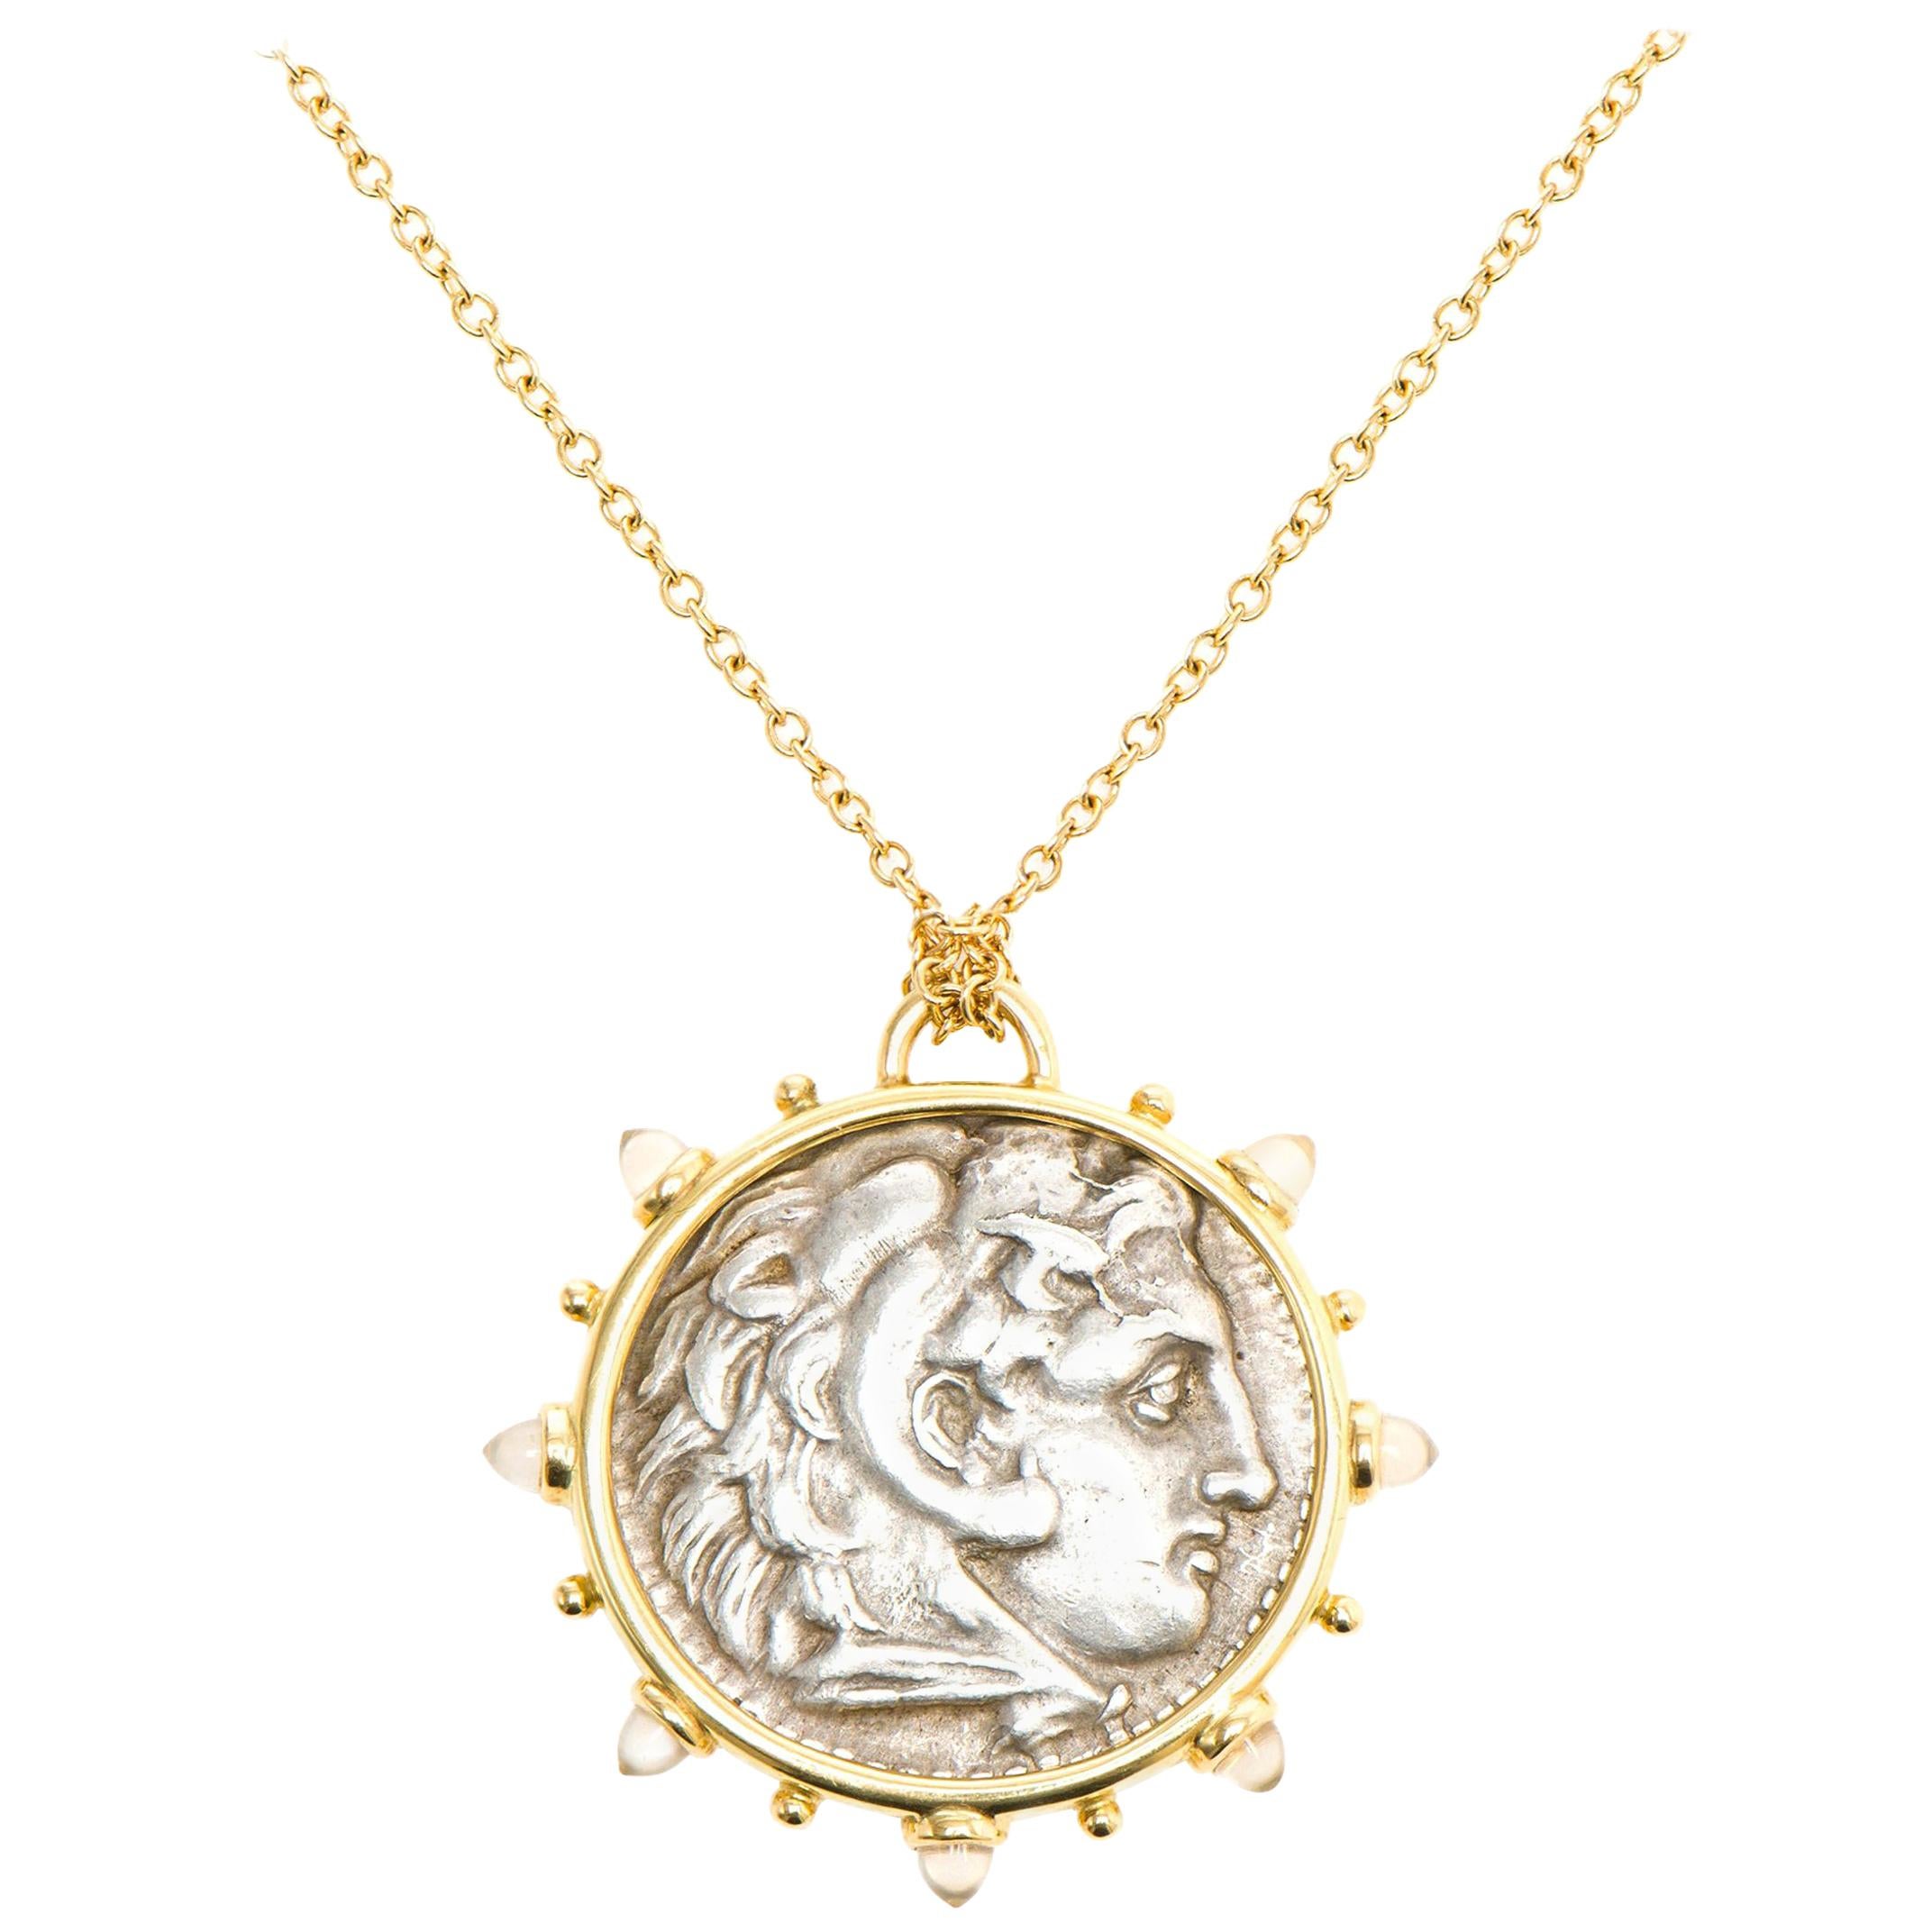 Dubini Alexander the Great Ancient Silver Coin Medallion Moonstone Gold Necklace For Sale